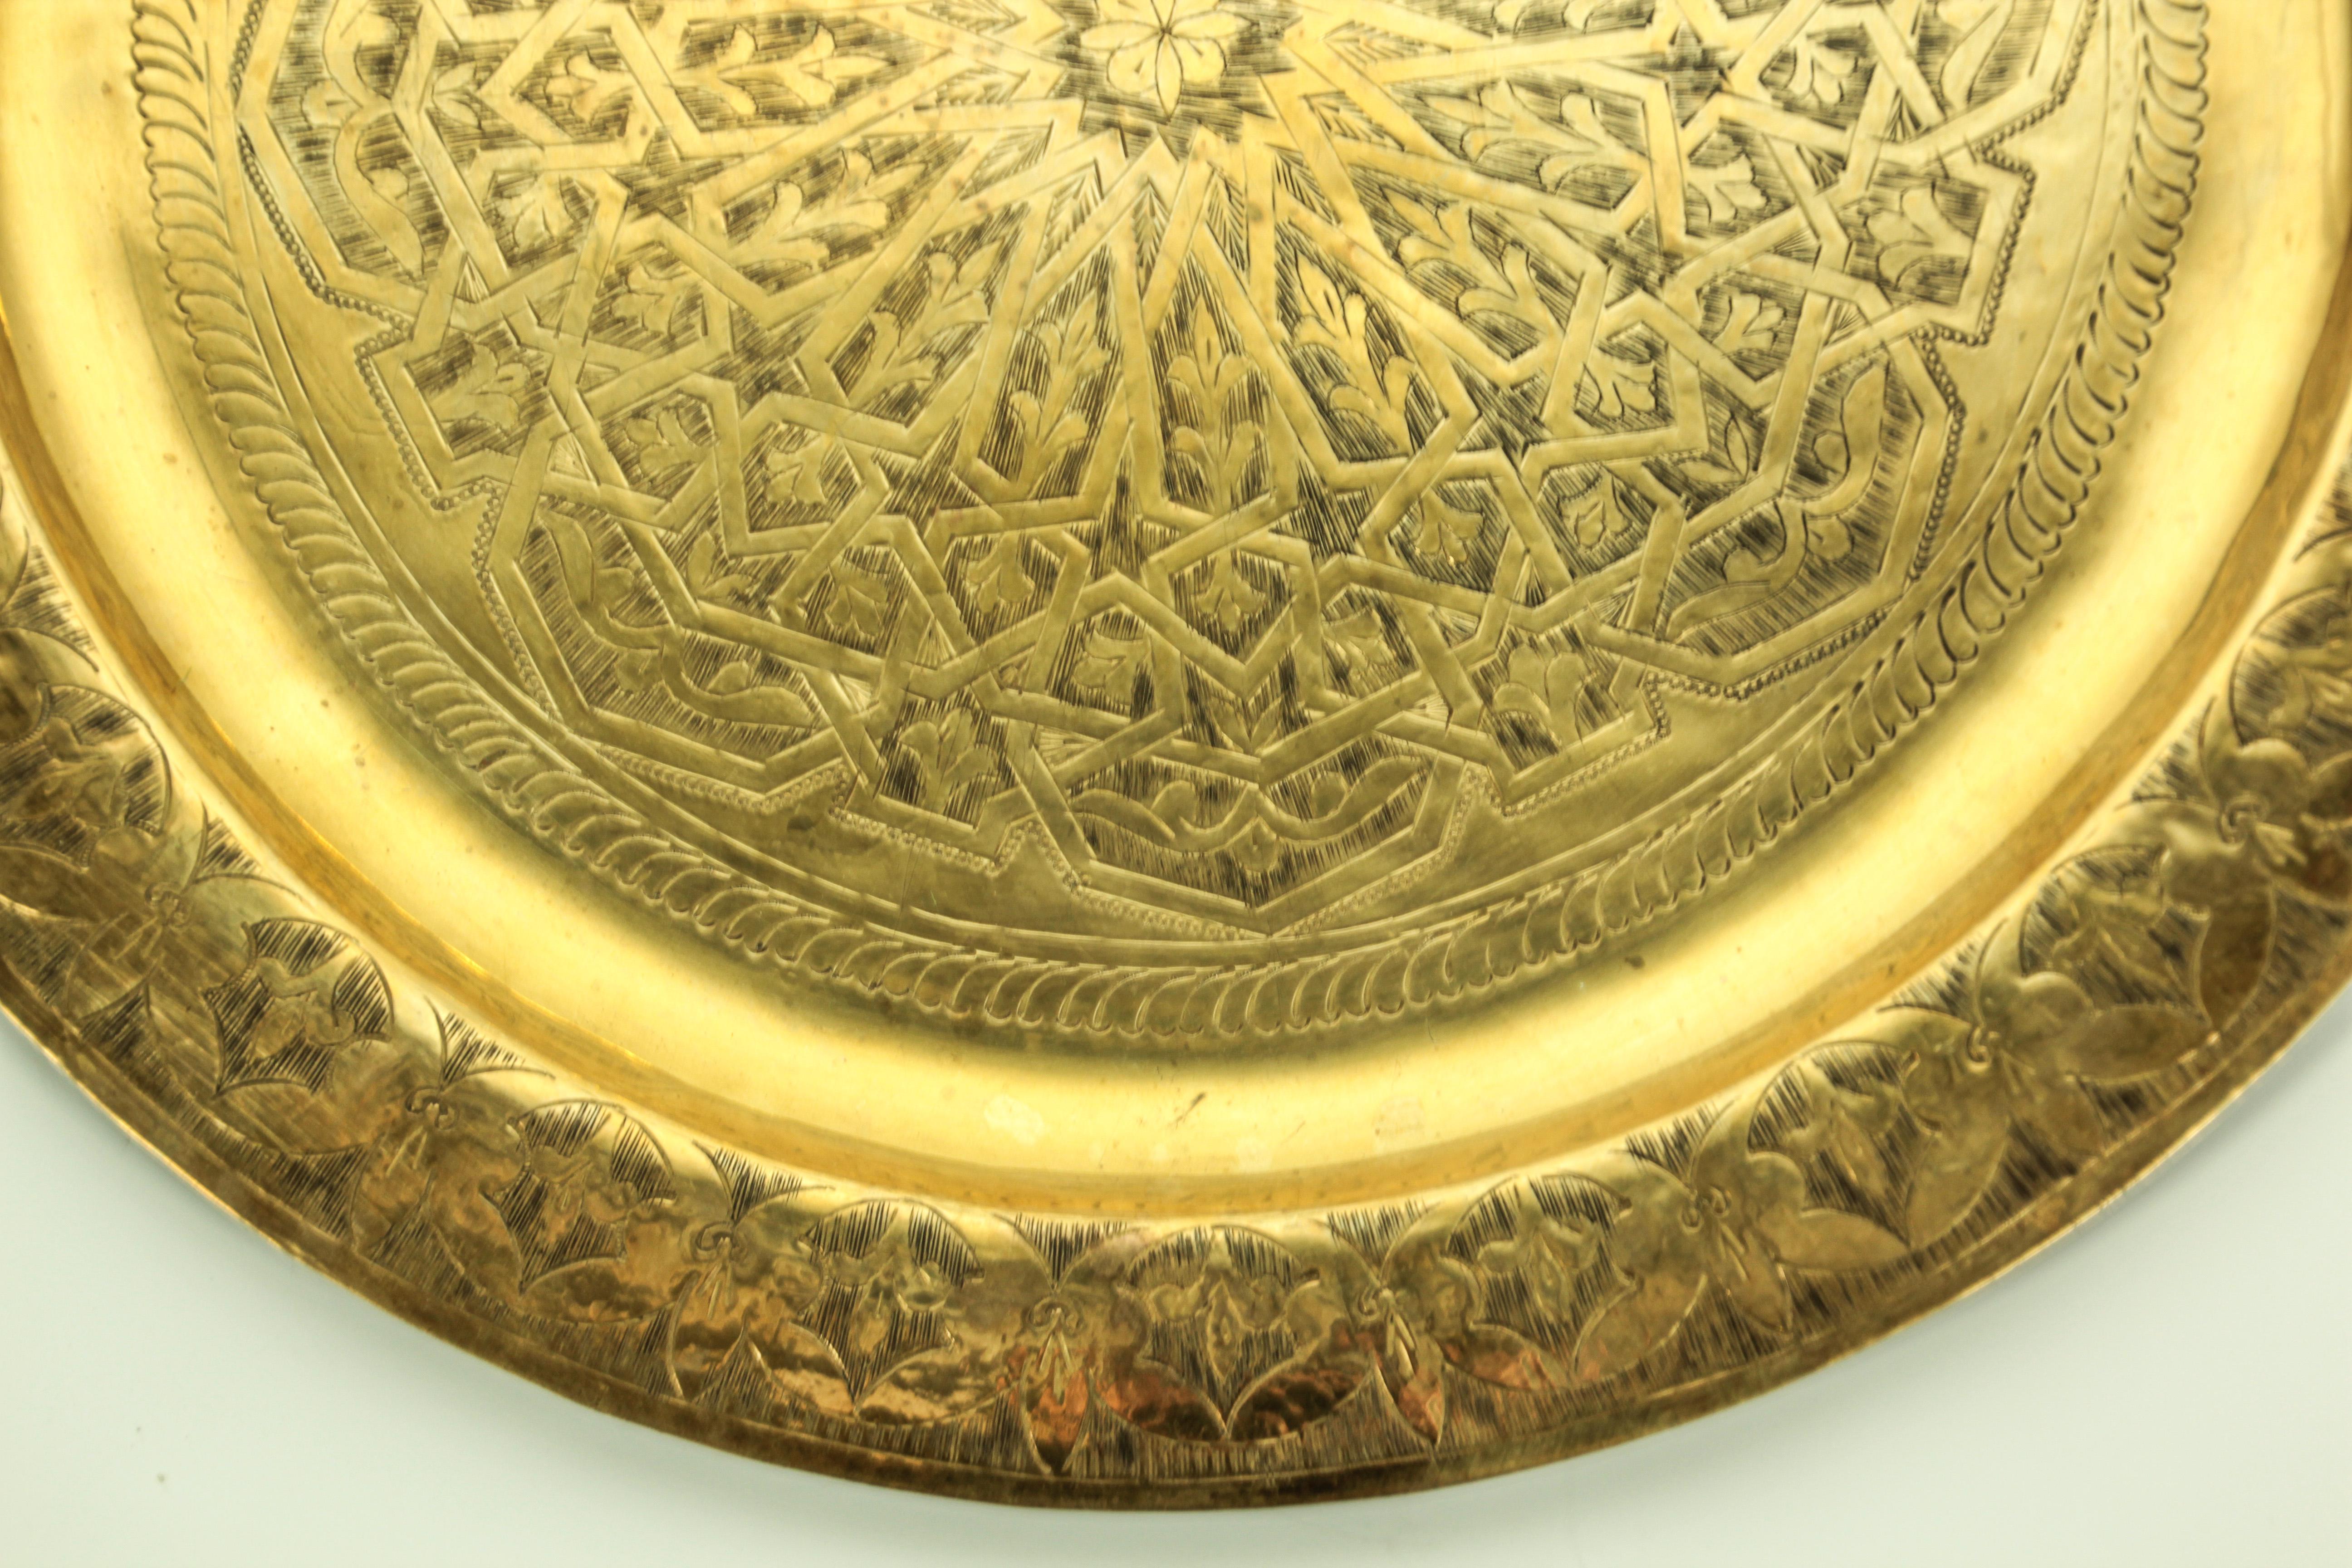 Moroccan antique round brass tray.
The handcrafted circular brass platter is decorated and hammered with geometric Moorish designs.
Metal brass with very fine hand chased floral and geometric and floral stylized Arabic designs.
Measures: Diameter